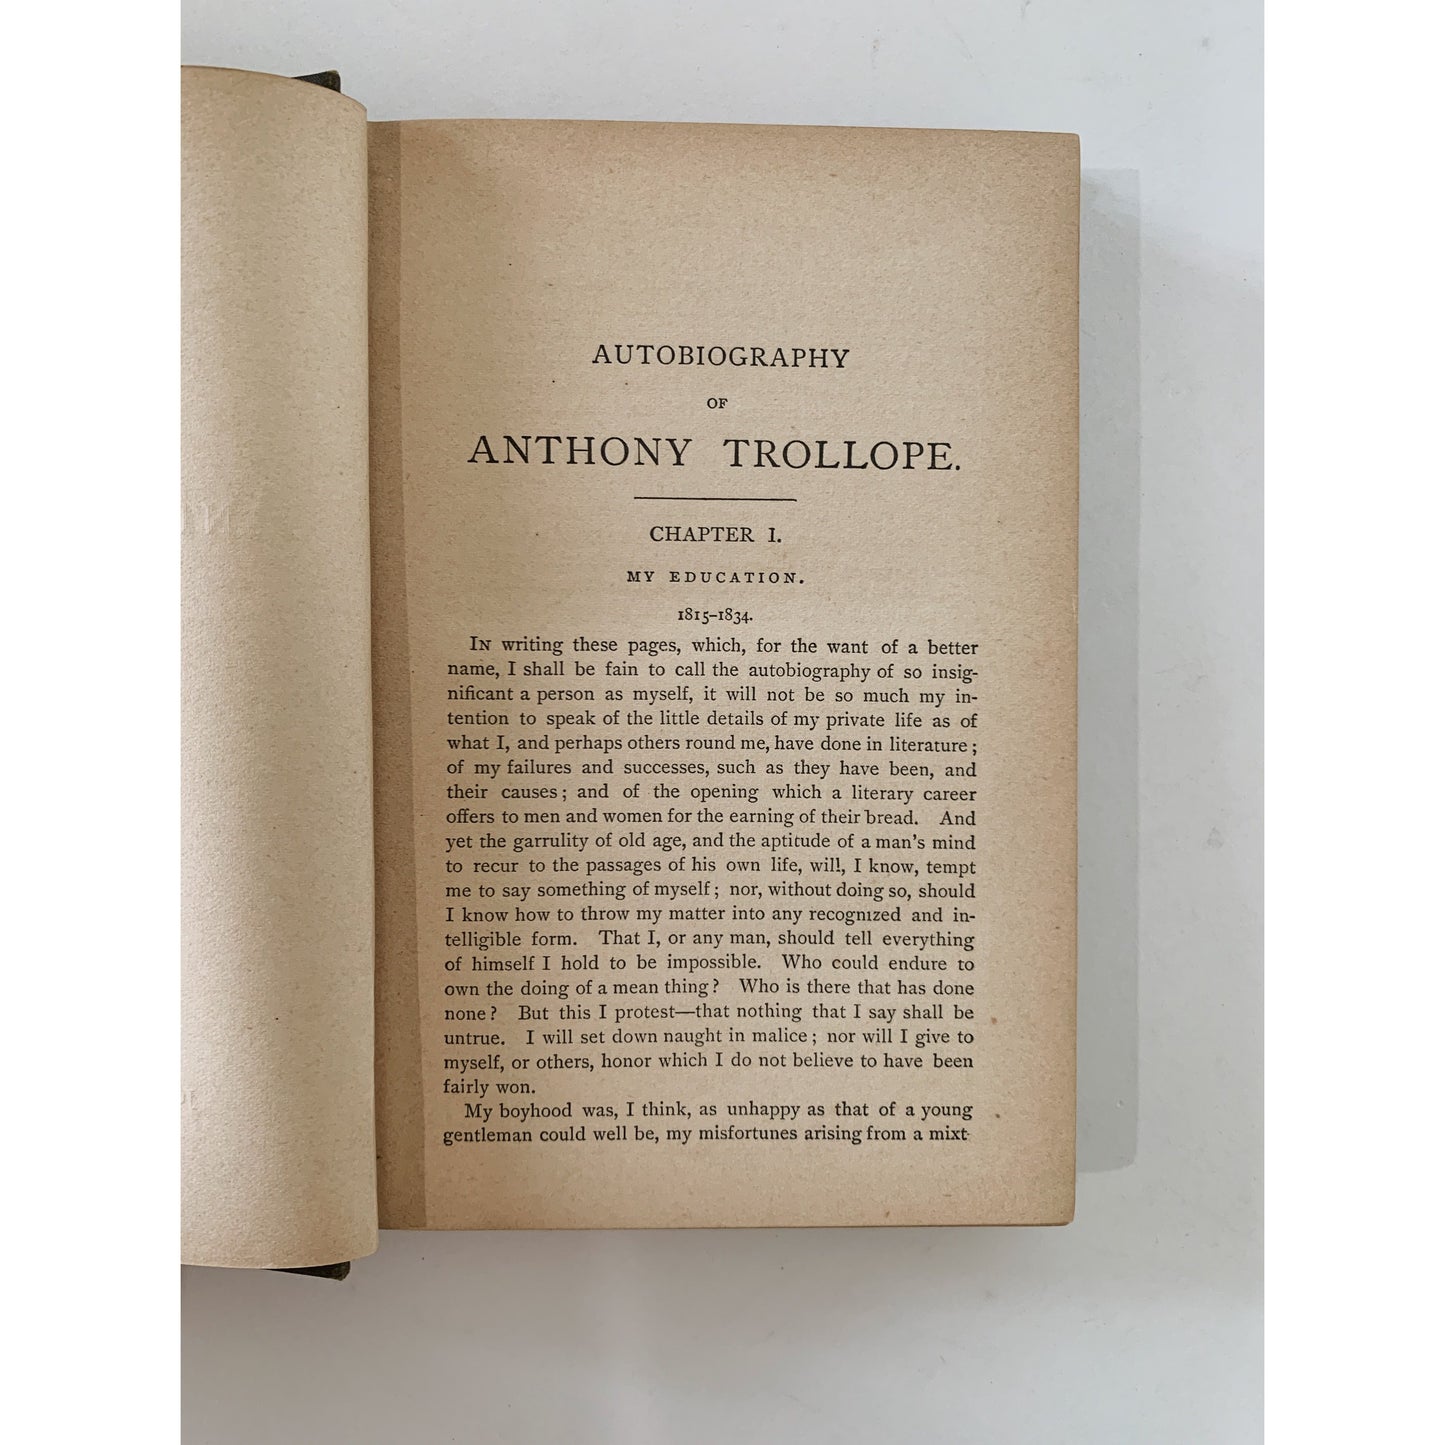 The Autobiography of Anthony Trollope, Caxton Edition, Ornate